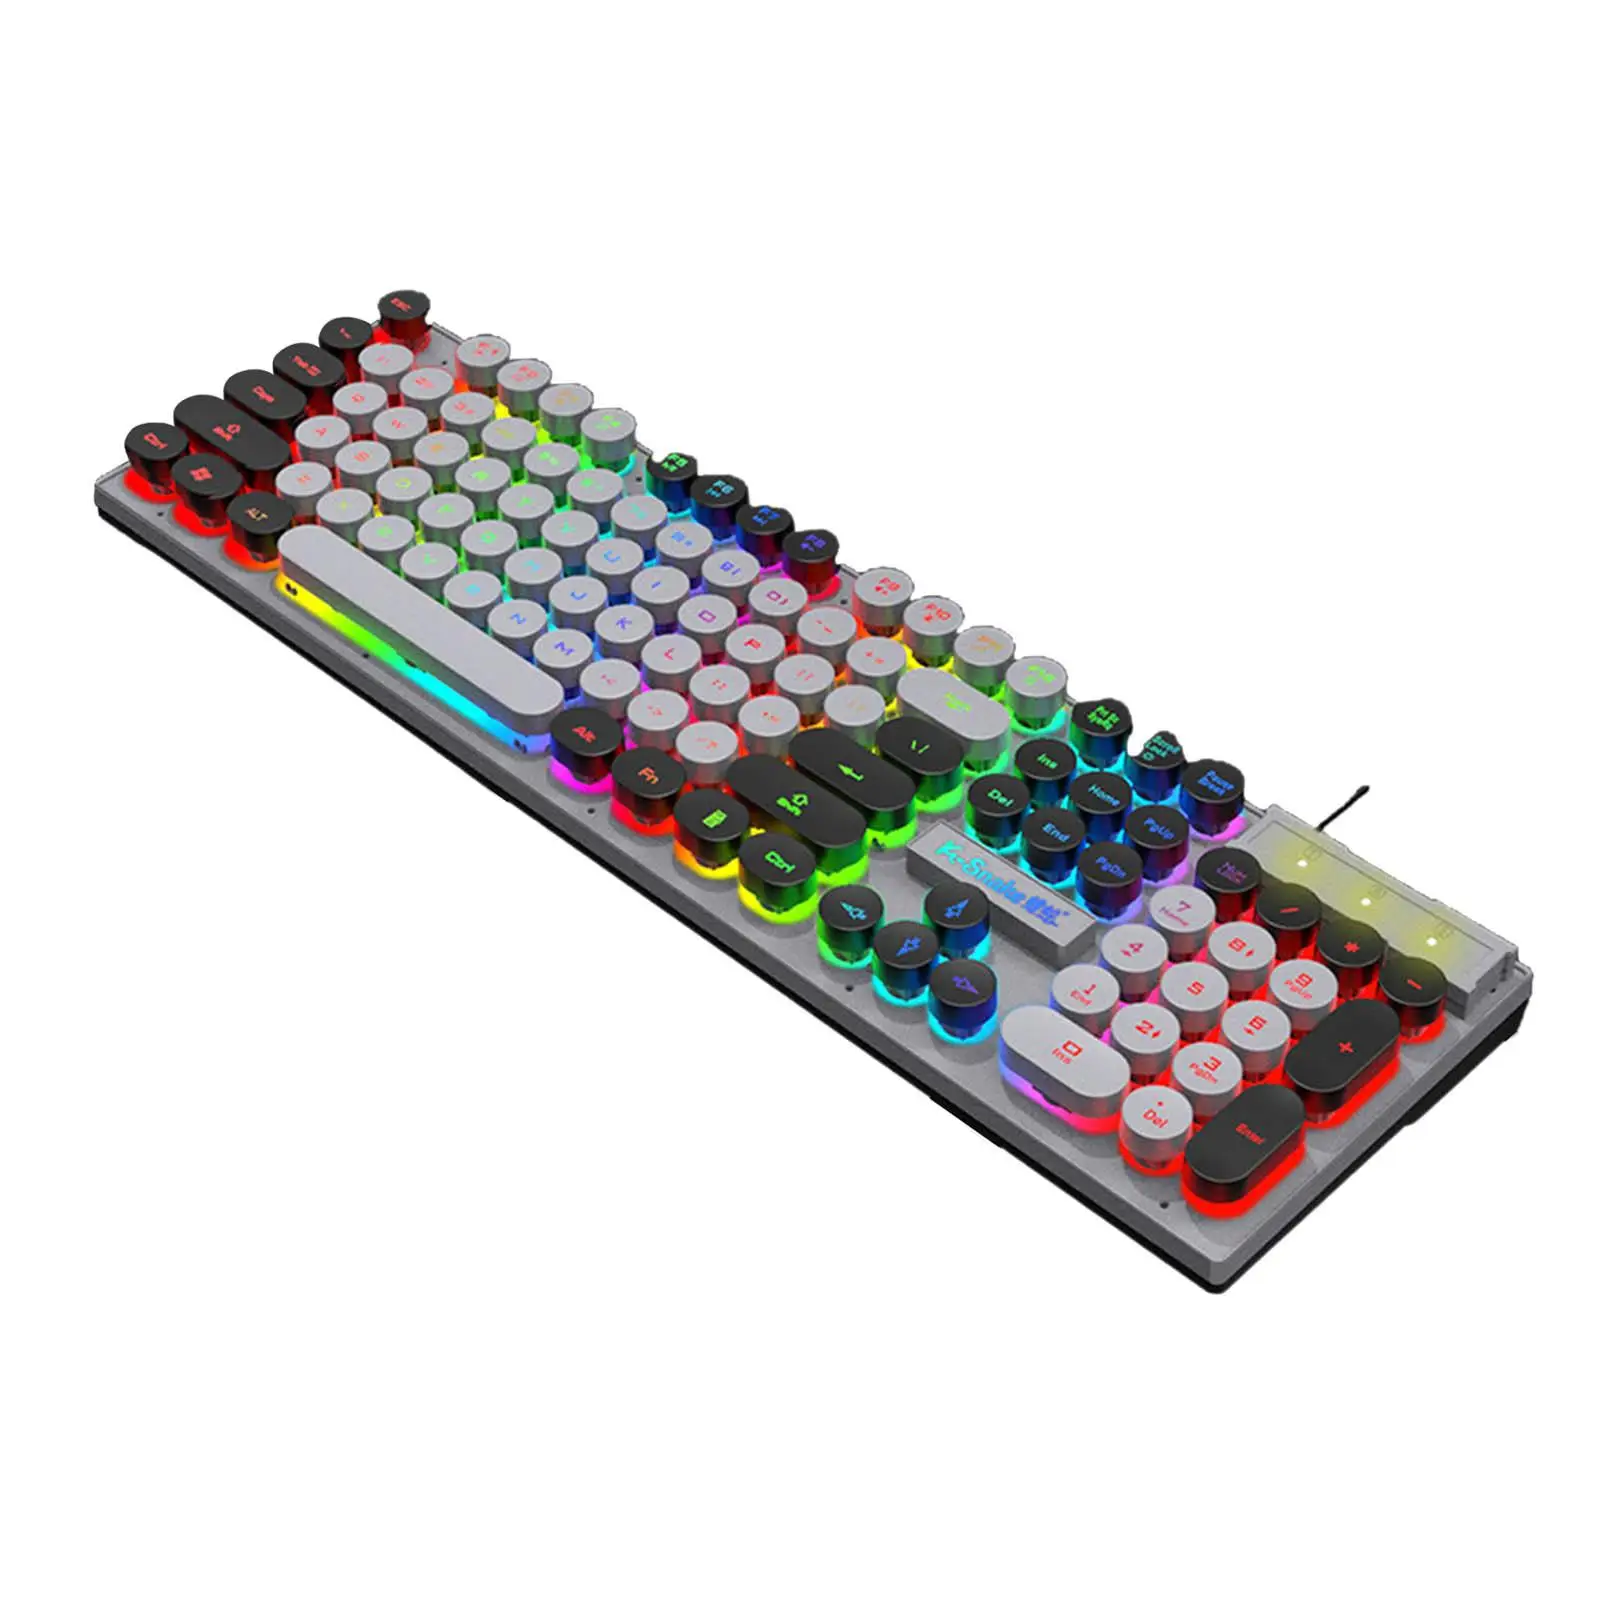 Mechanical Gaming Keyboard 104 Keys Wired USB Round Keycaps for Desktop Computer